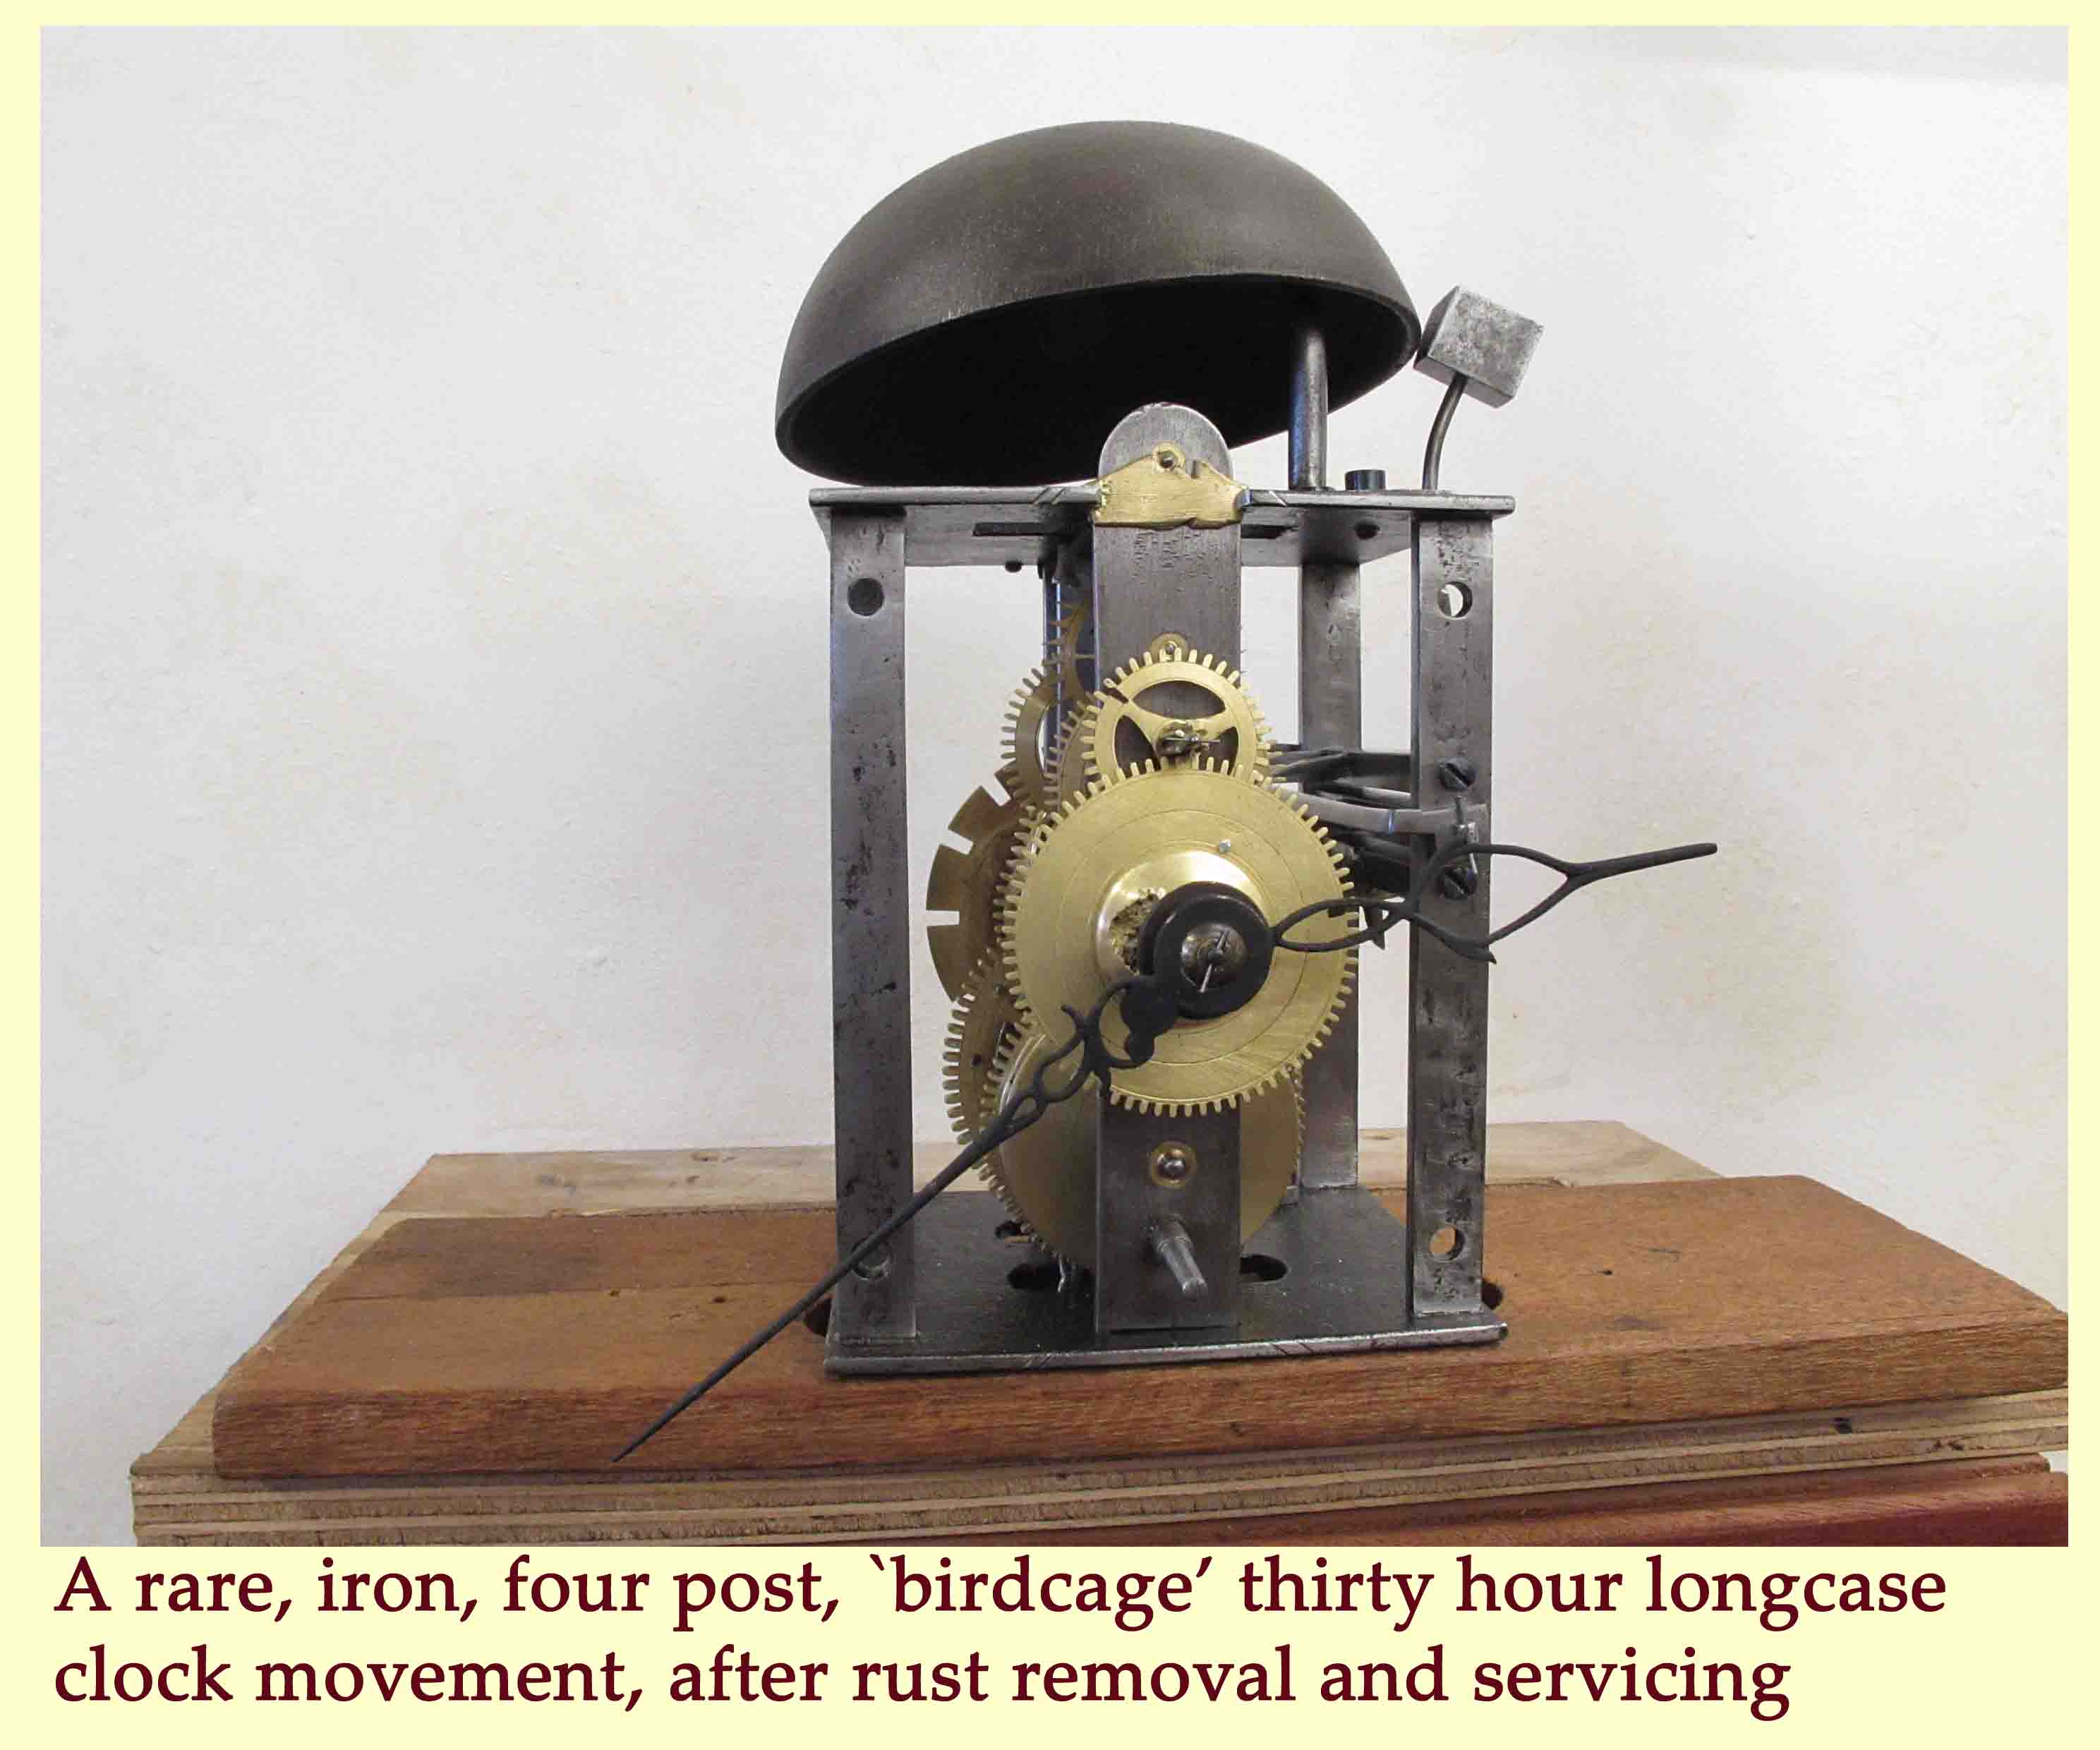 Four post, `birdcage' movement from a longcase clock